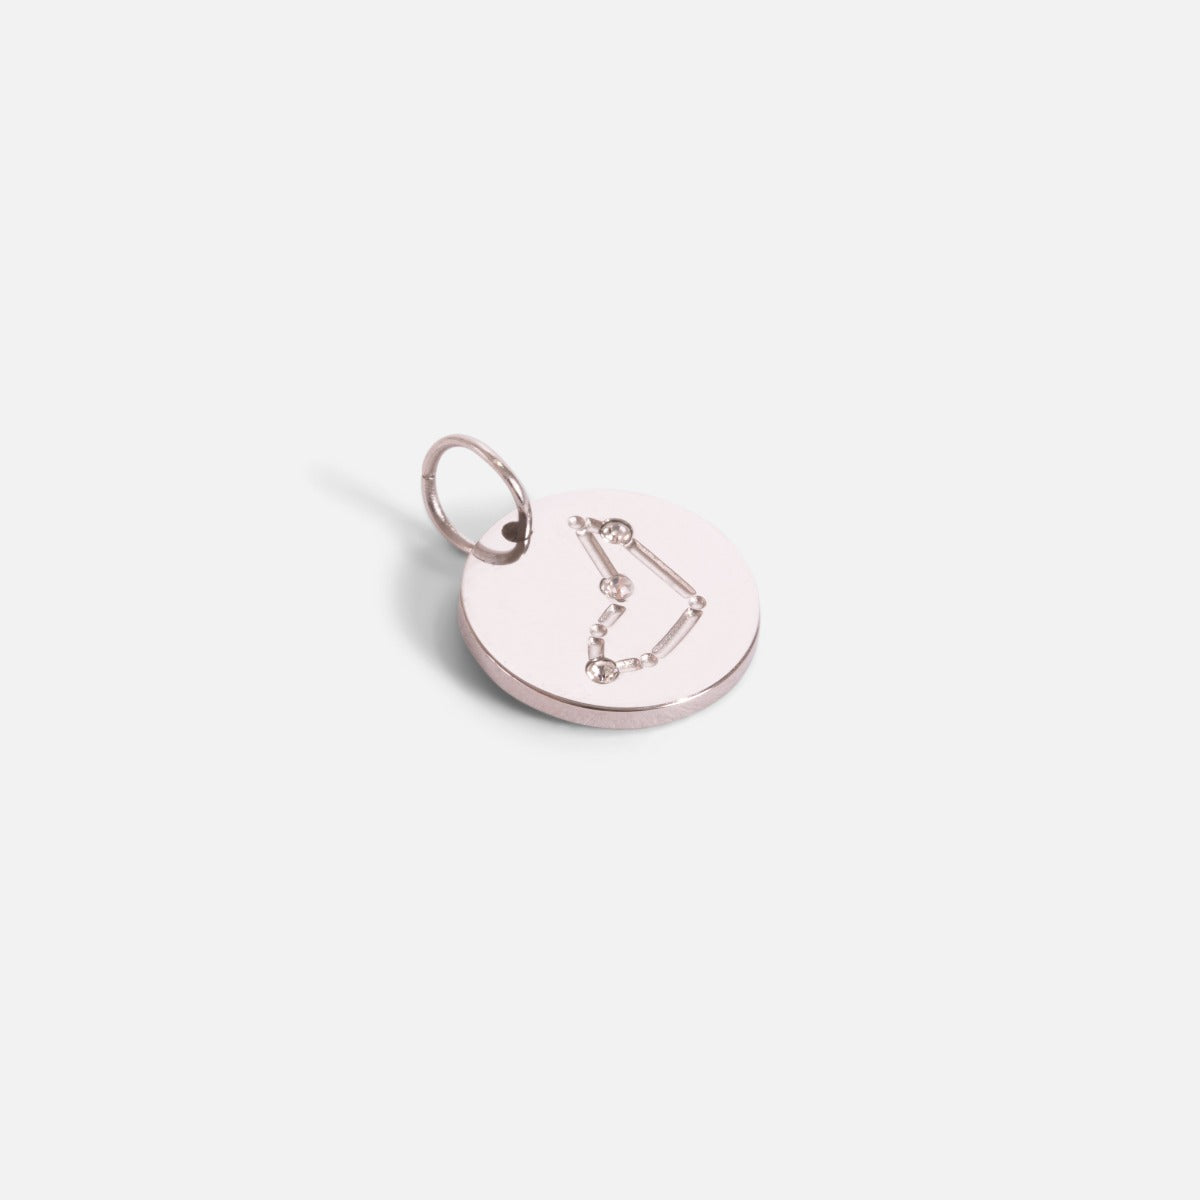 Small silvered charm engraved with the zodiac constellation "capricorn"   